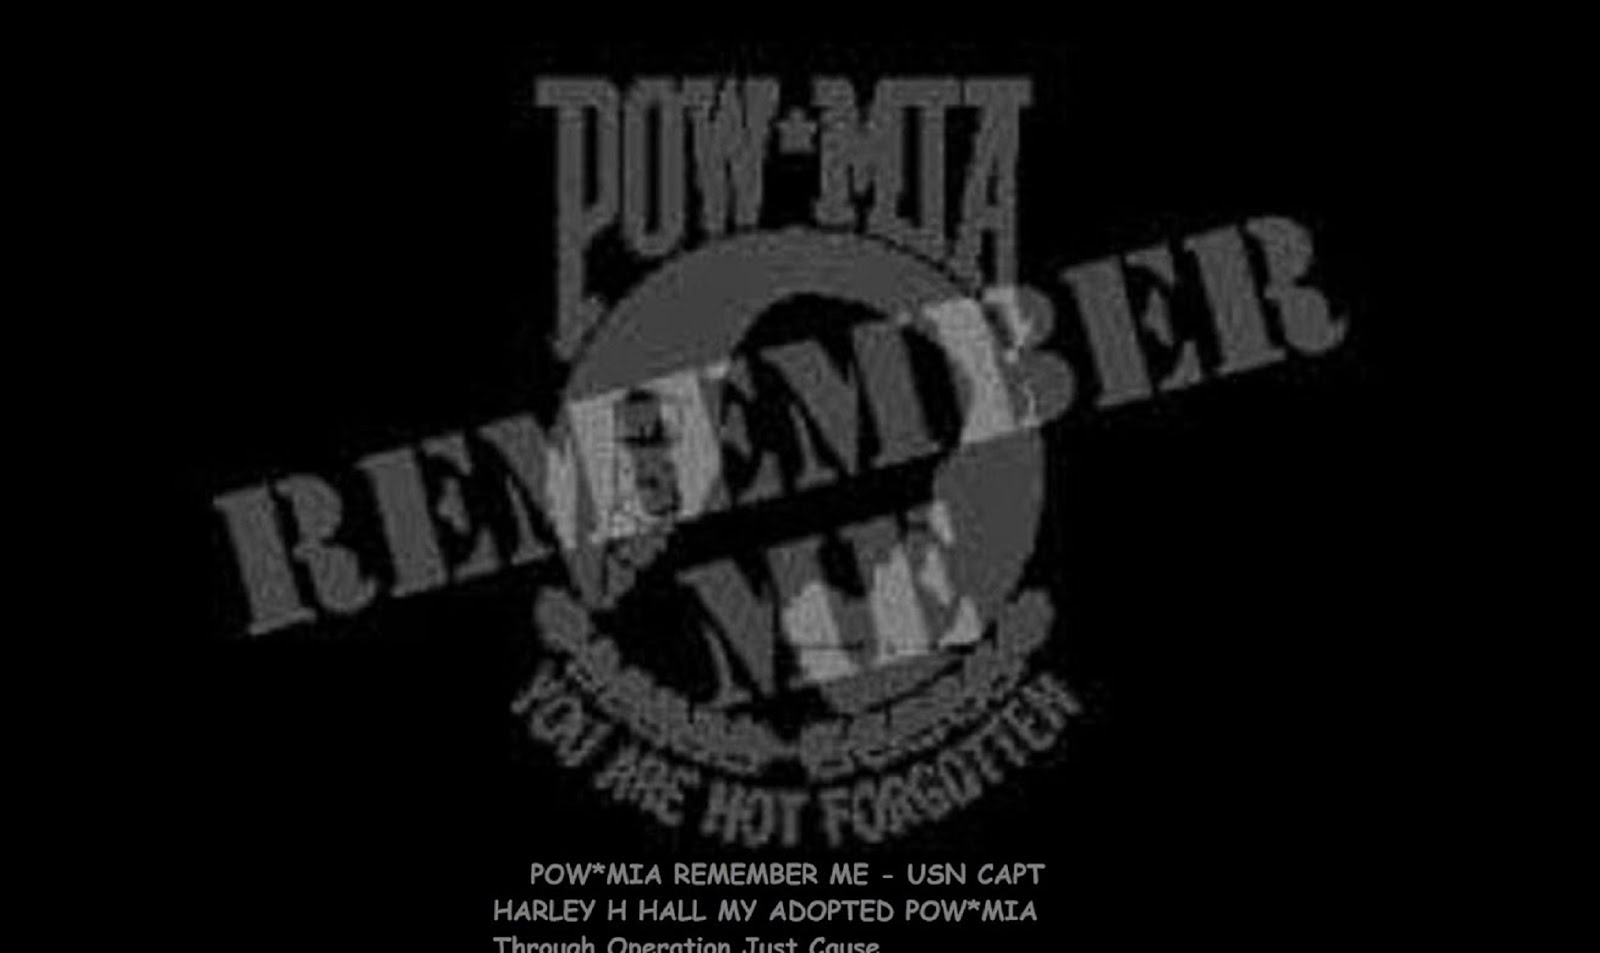 POW*MIA REMEMBER ME - USN CAPT HARLEY H HALL MY ADOPTED POW*MIA Through Operation Just Cause